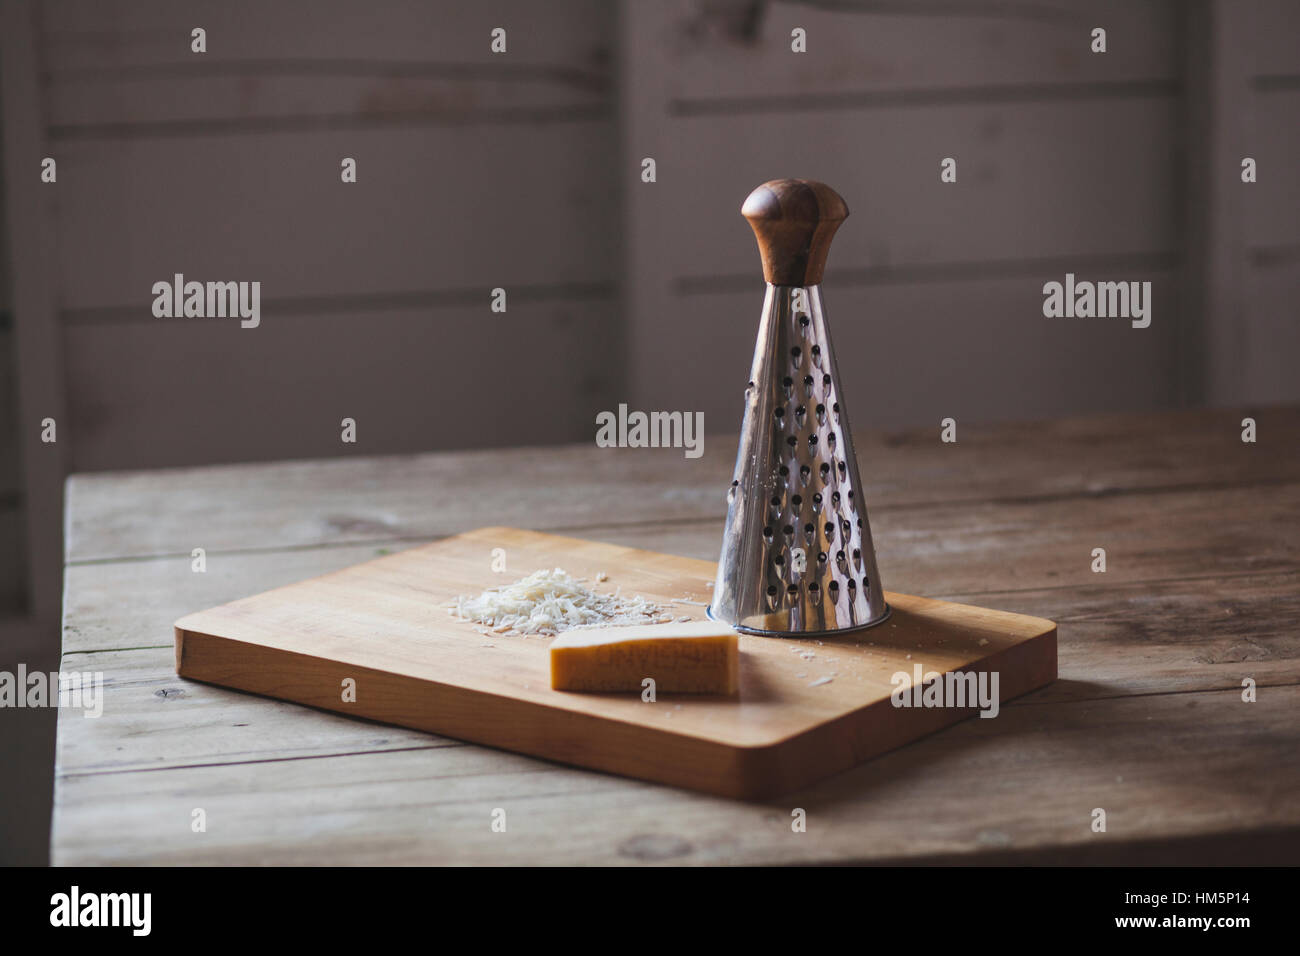 https://c8.alamy.com/comp/HM5P14/cheese-with-grater-on-cutting-board-over-wooden-table-HM5P14.jpg